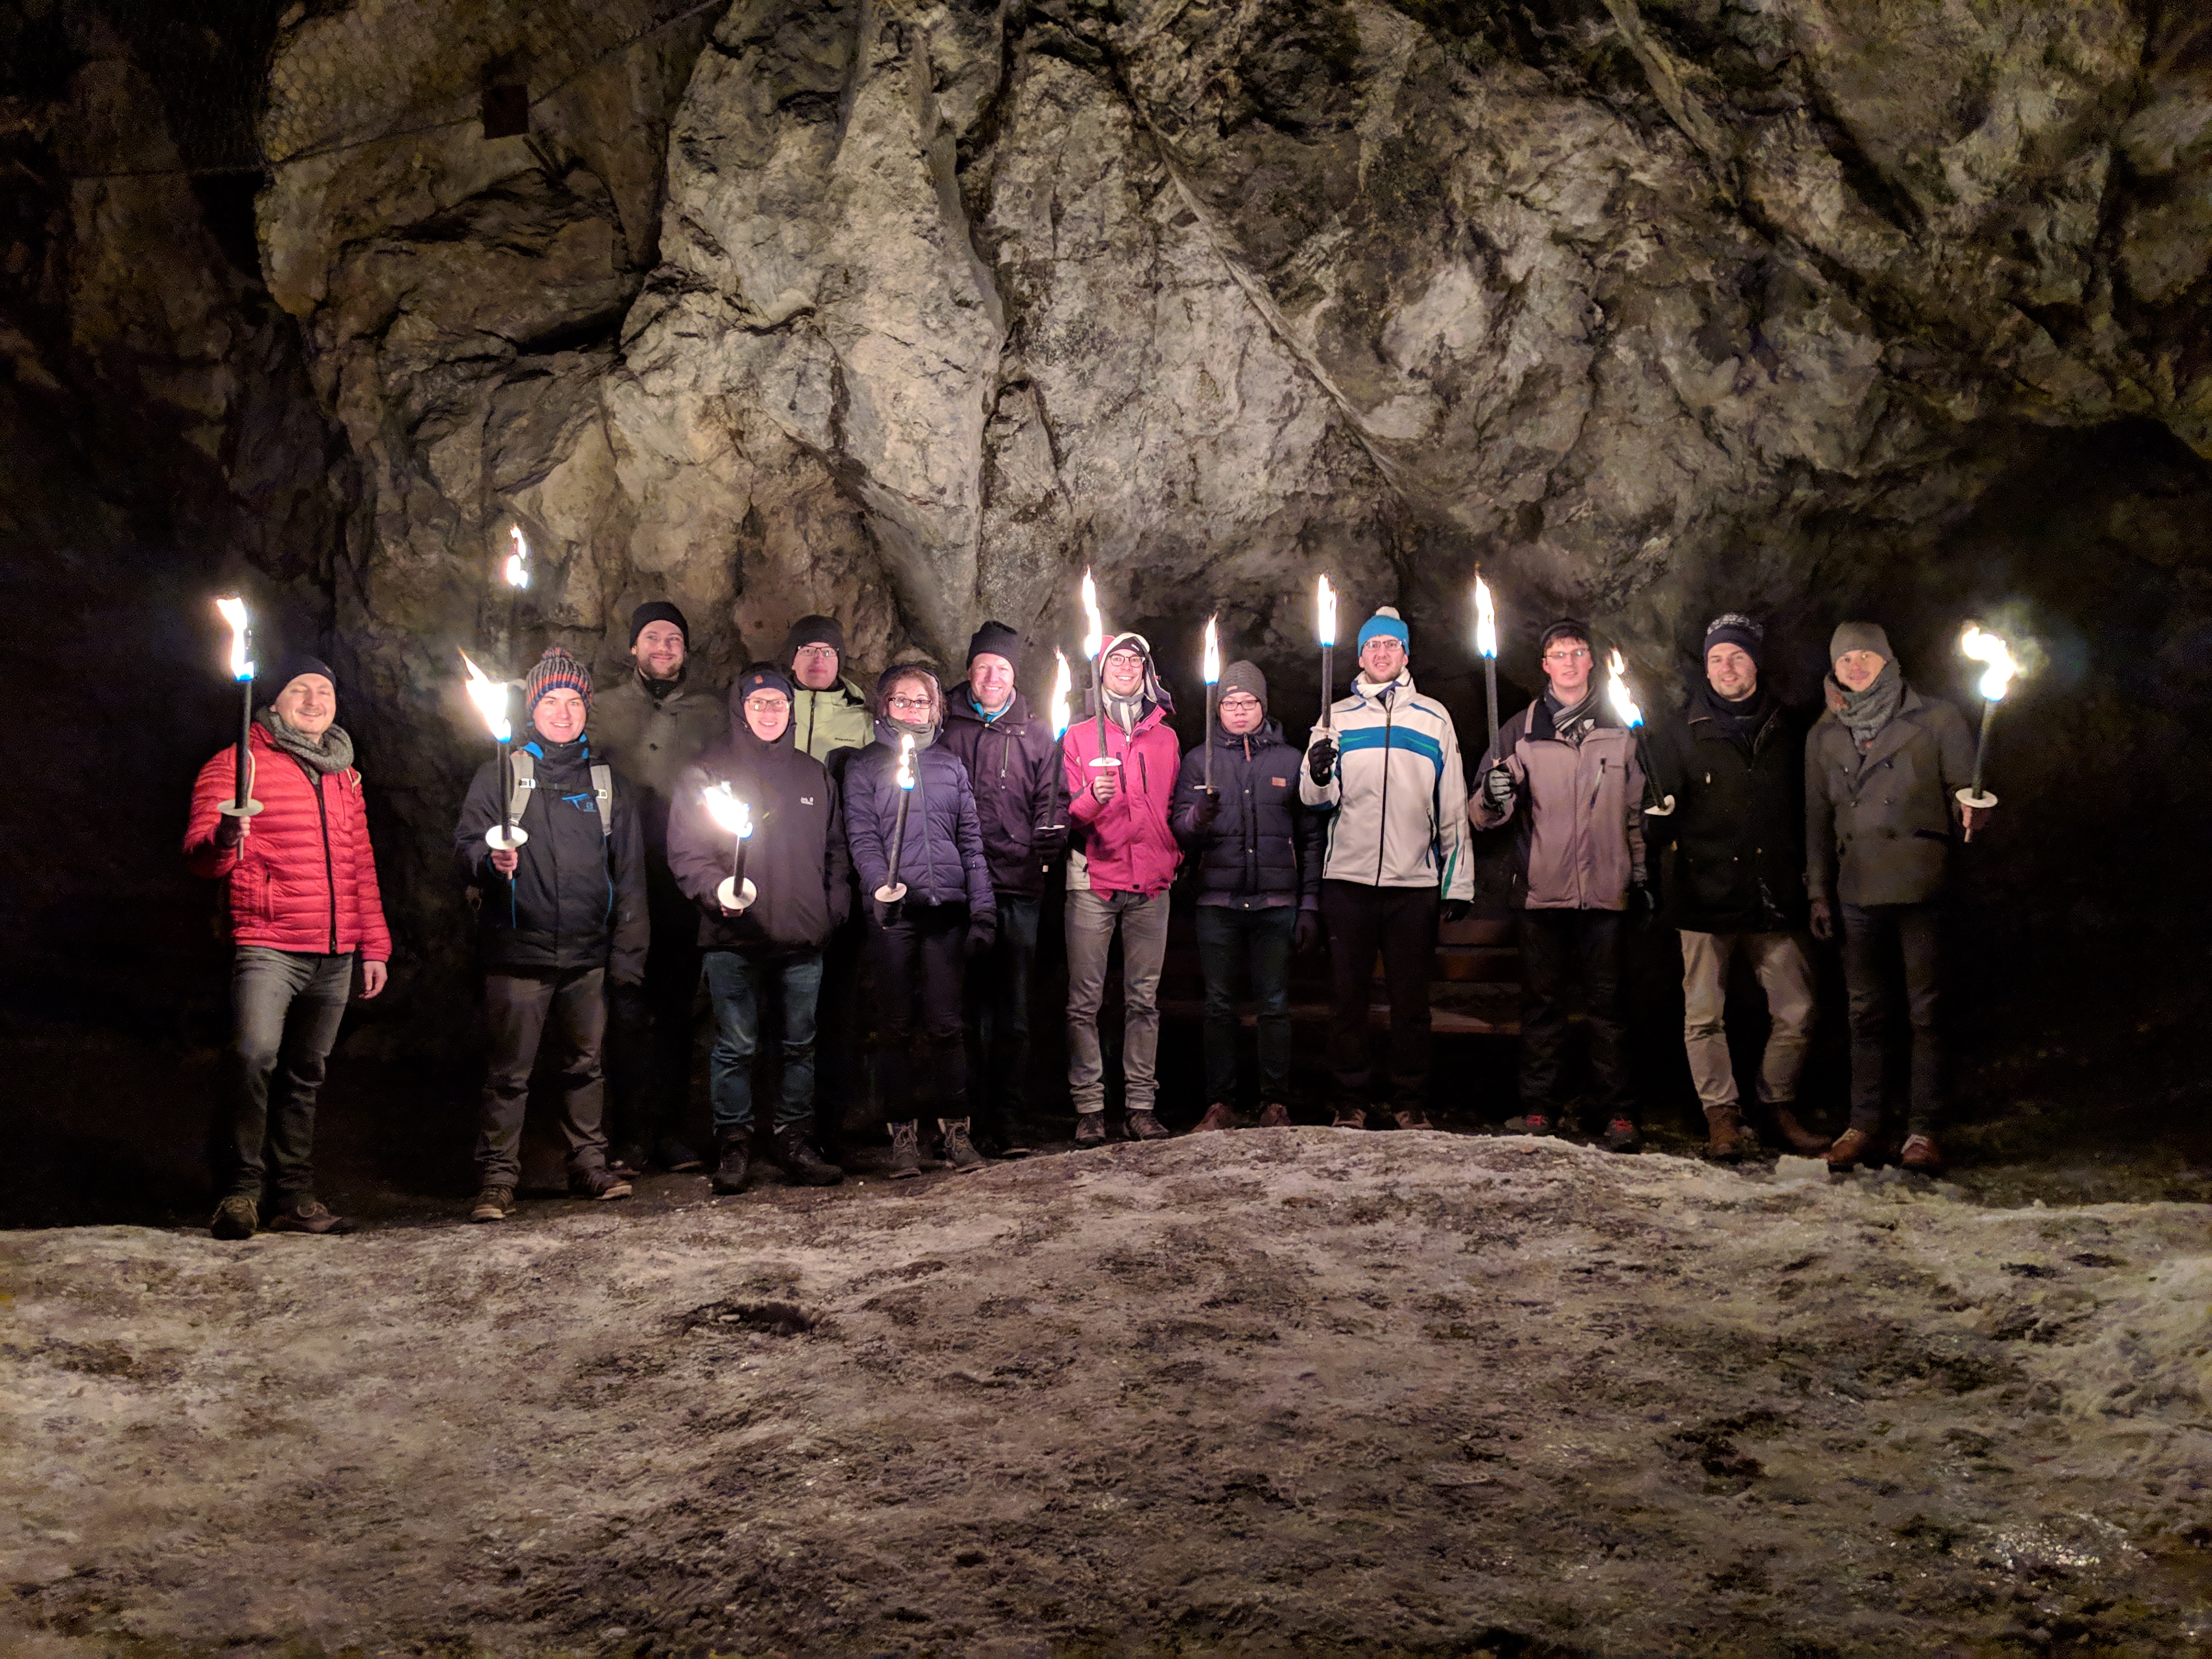 Group photo during a torchlight hike.